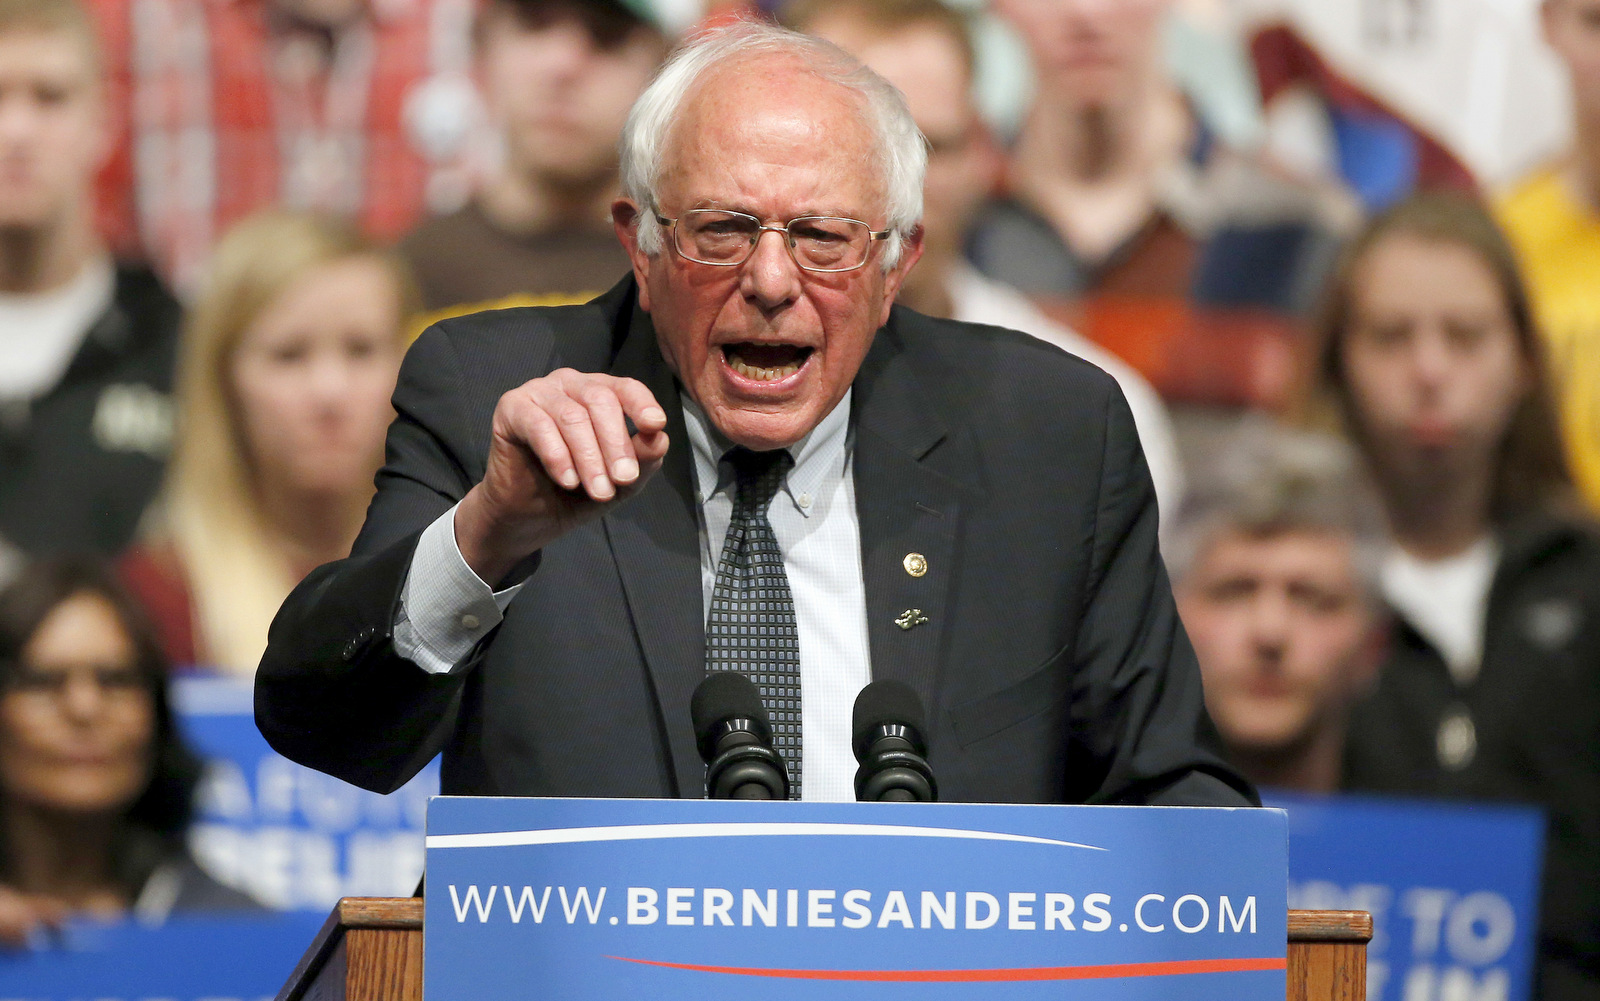 Democratic presidential candidate Sen. Bernie Sanders, I-Vt., speaks at a campaign rally in Laramie, Wyo., Tuesday, April 5, 2016. Sanders won the Democratic presidential primary in Wisconsin Tuesday. (AP Photo/Brennan Linsley)